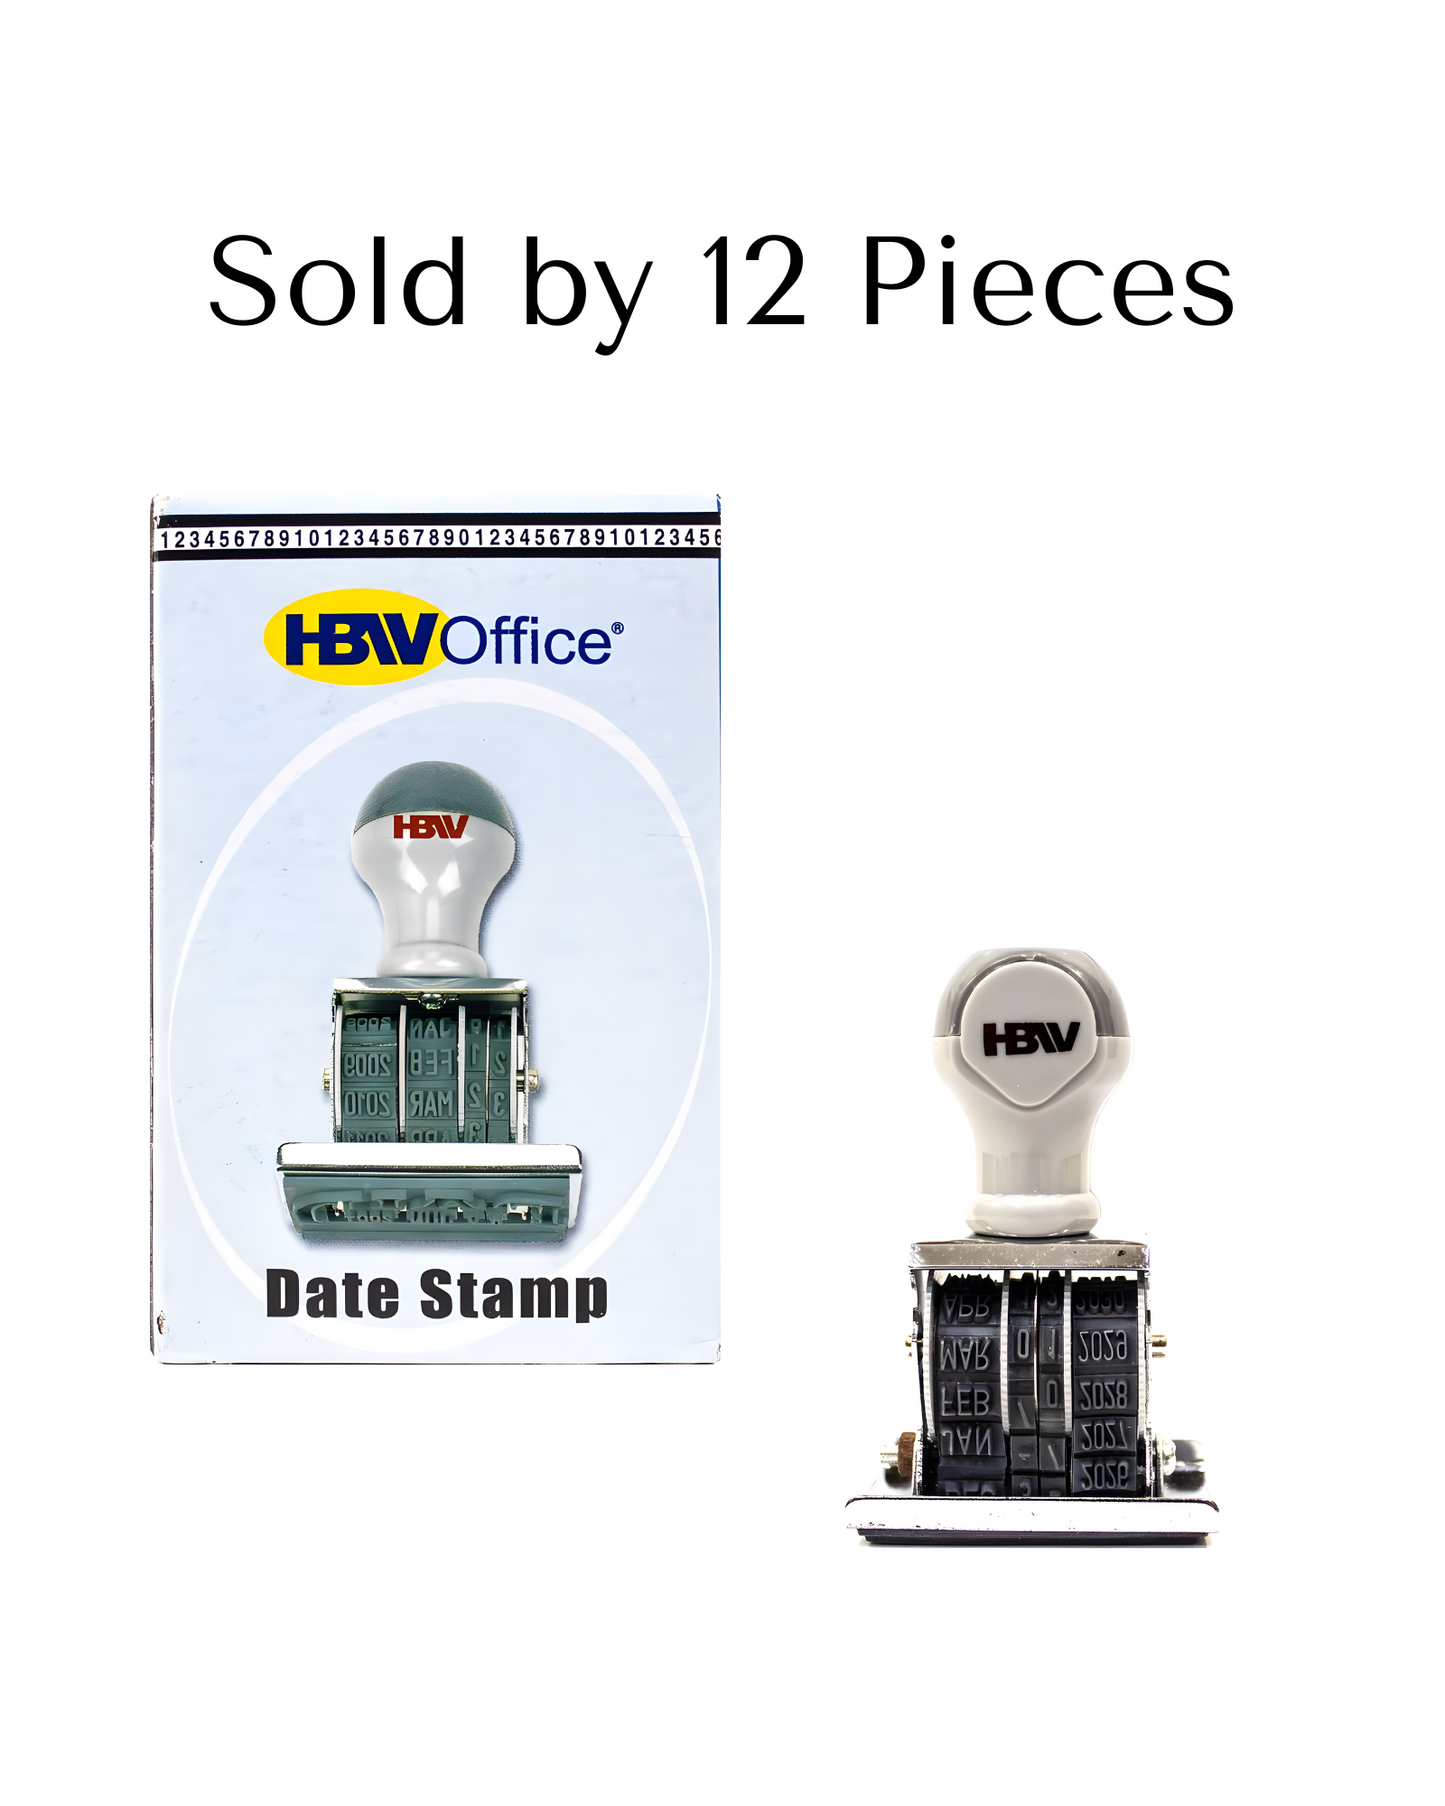 HBW Paid Dater Stamp DSP-P1 (12pcs)